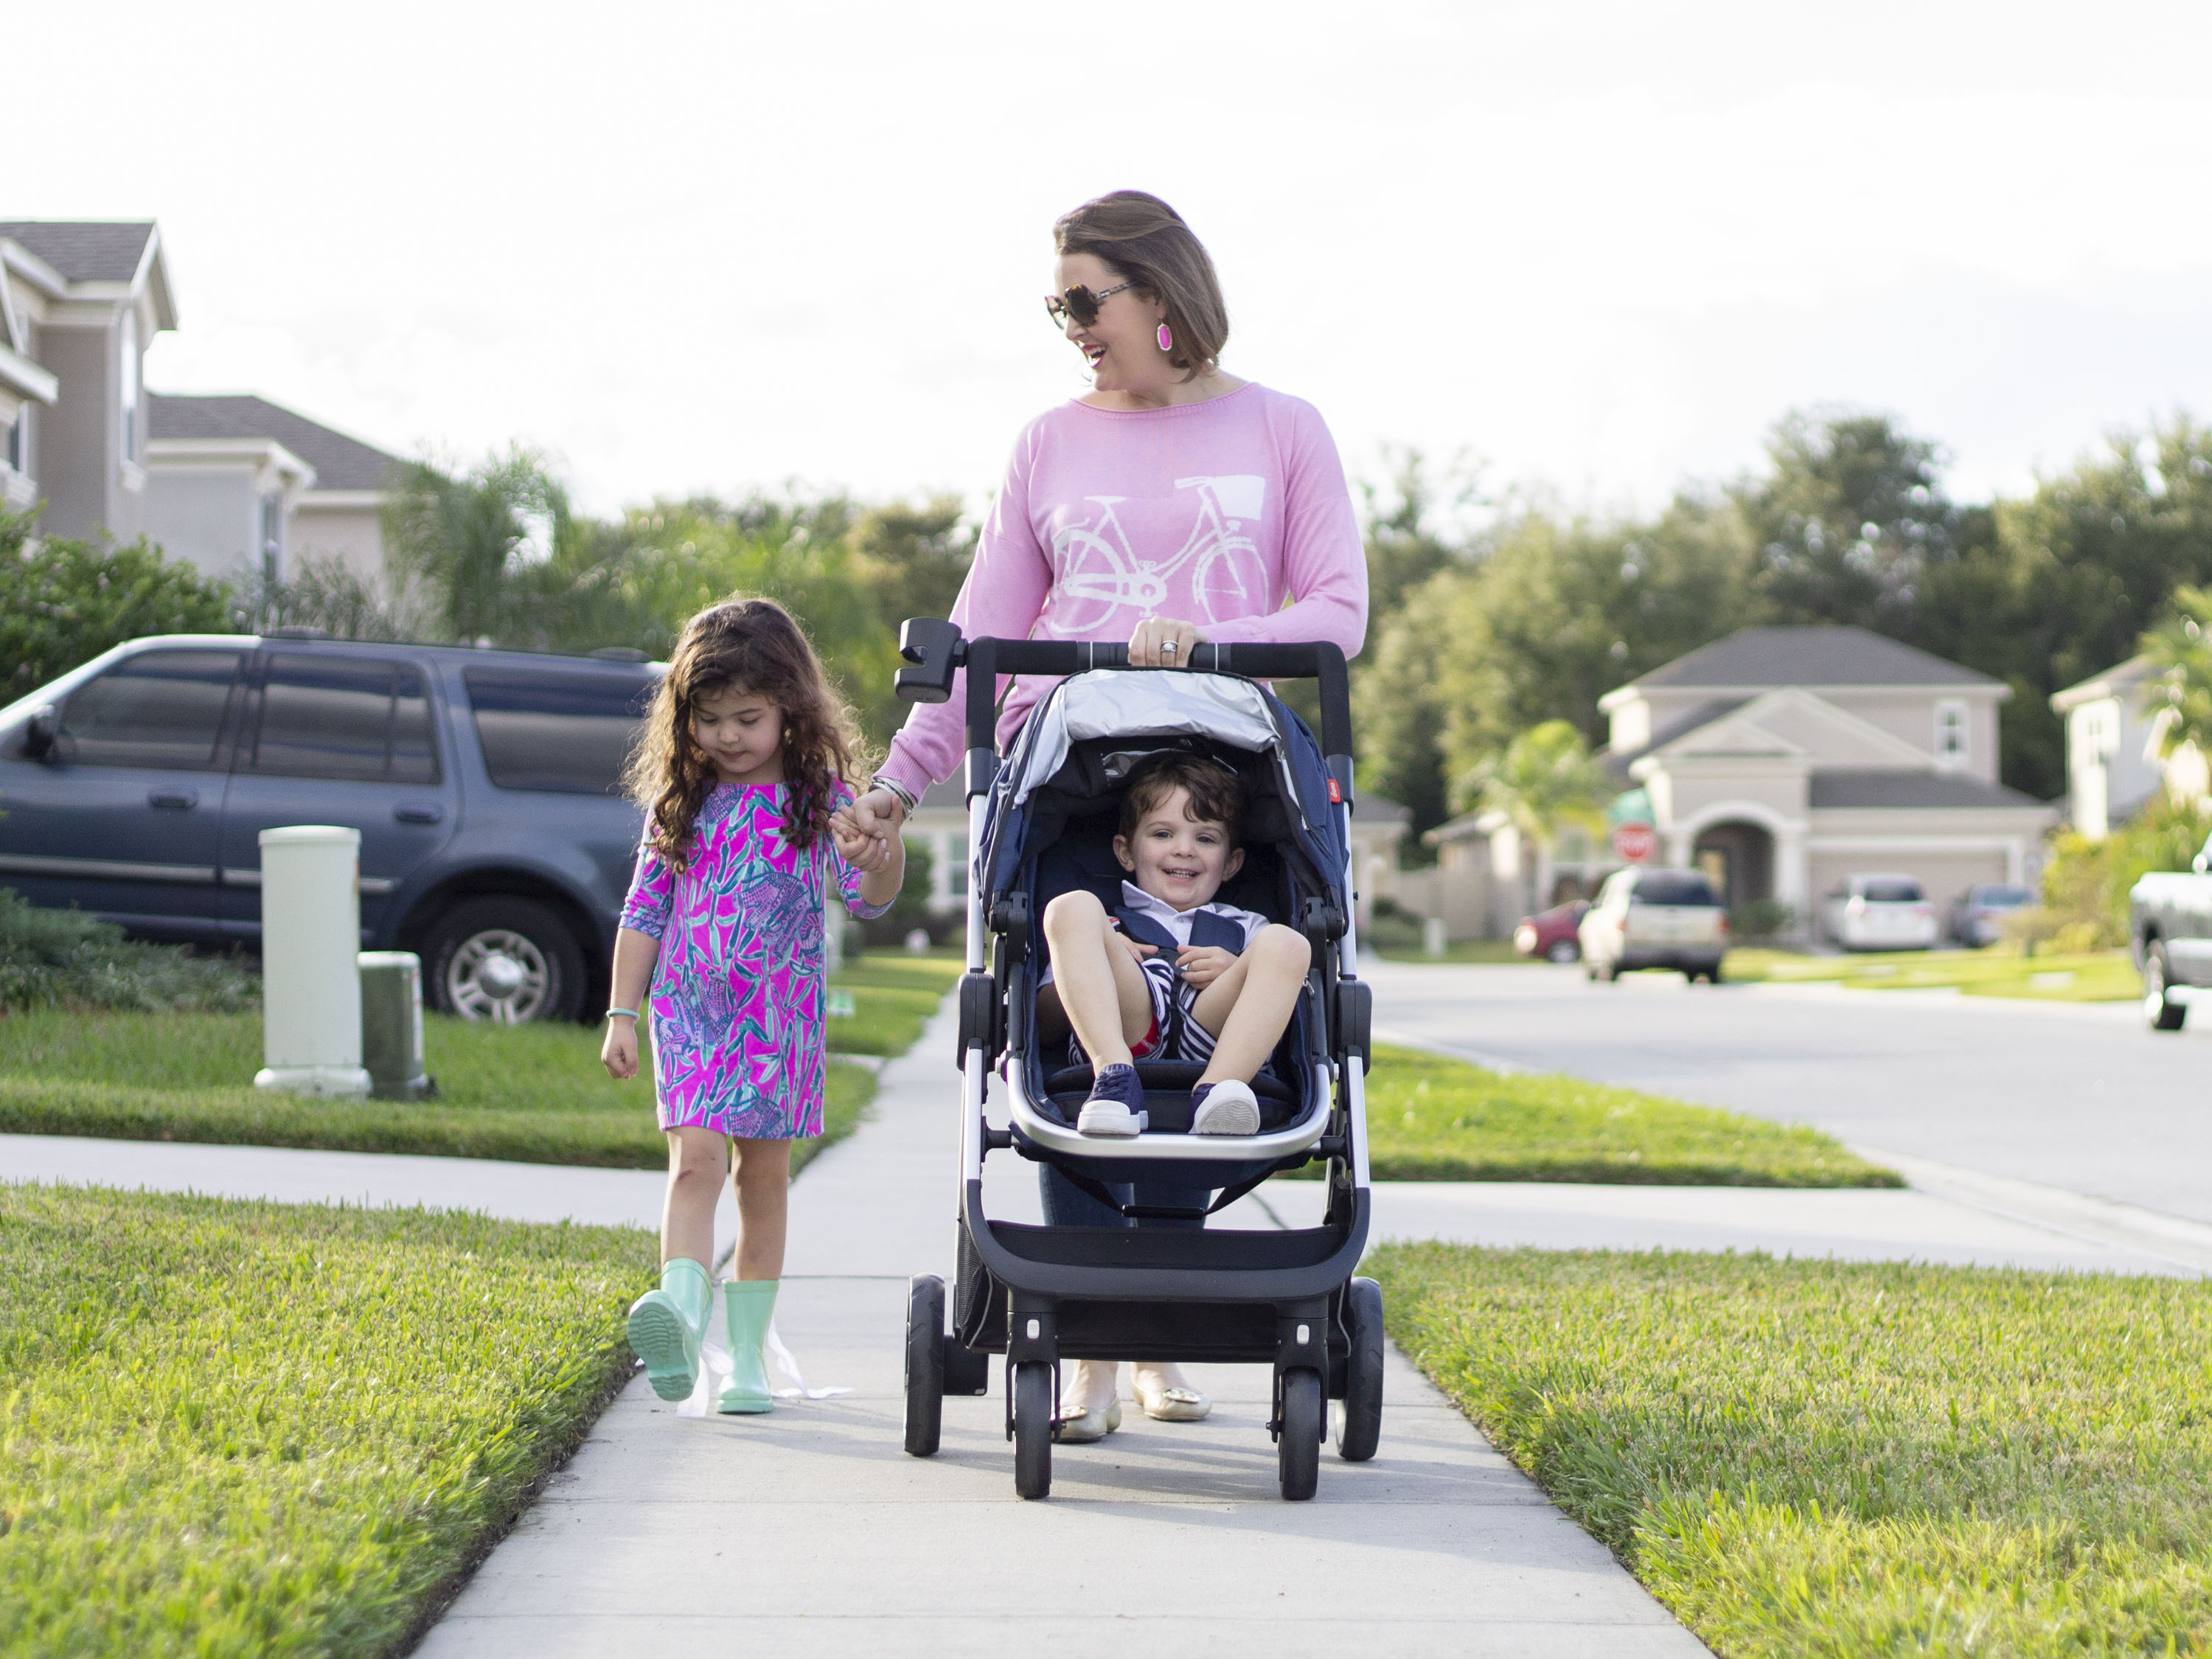 diono quantum 6 in 1 stroller review